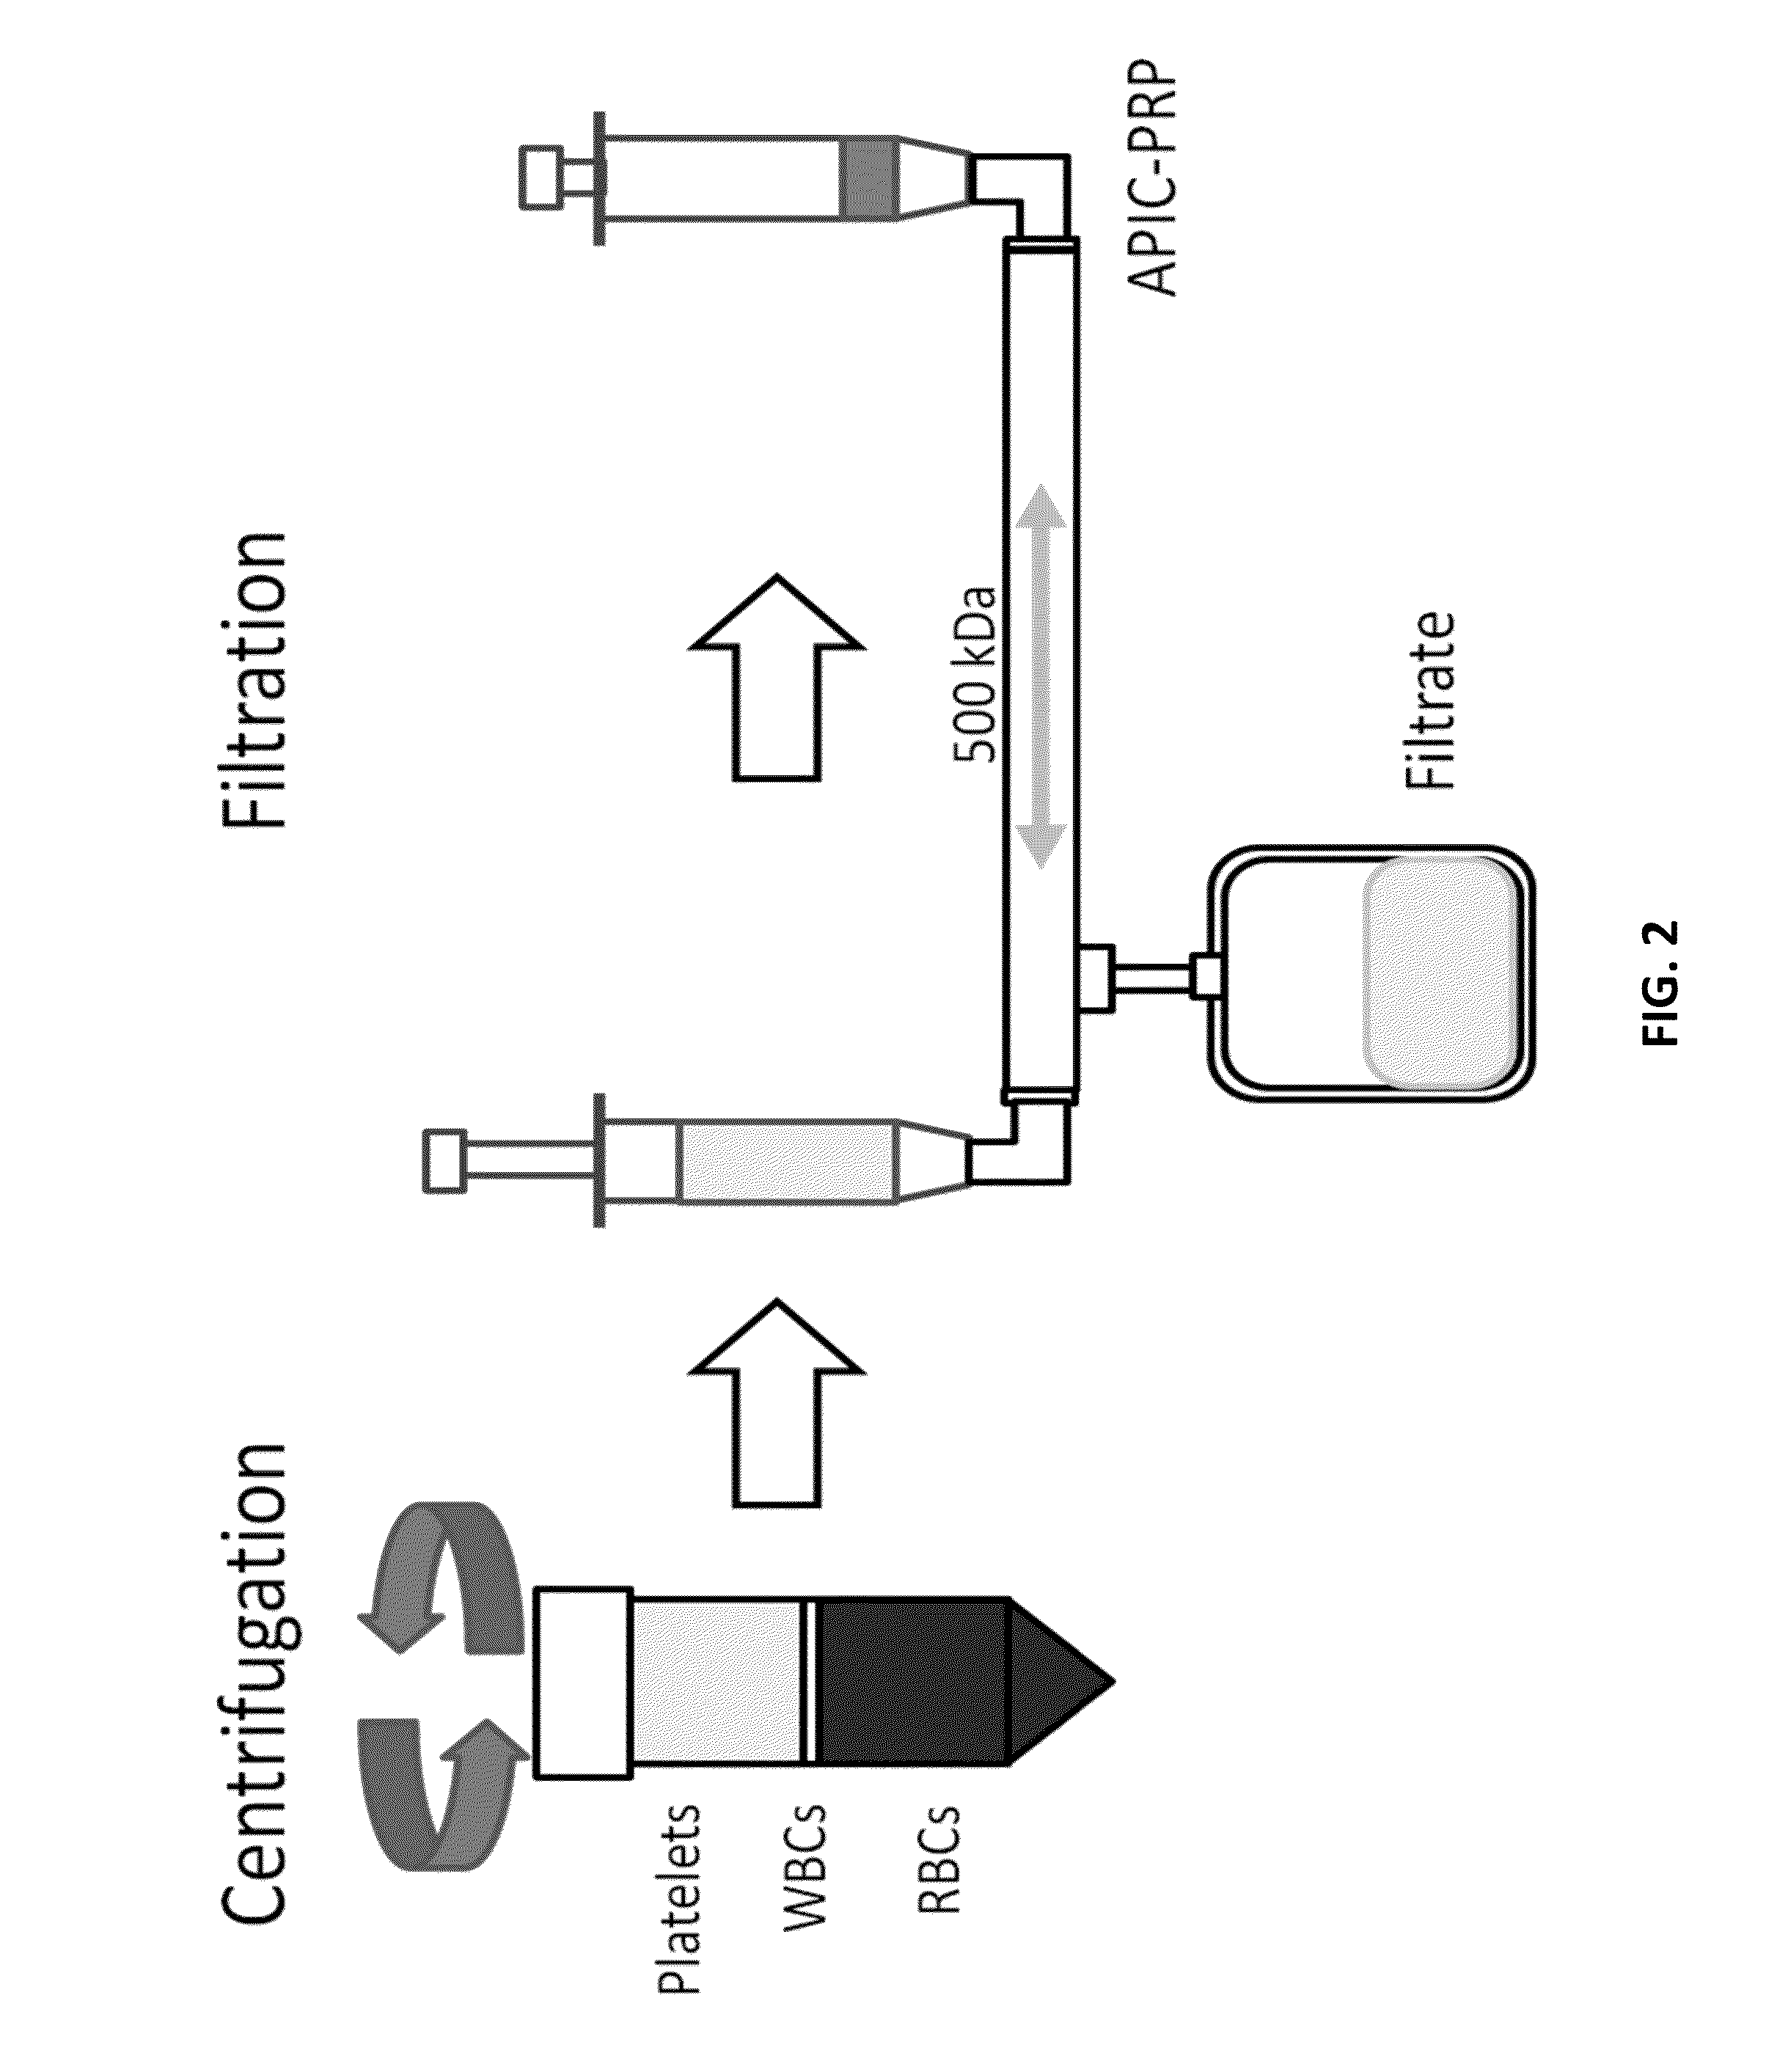 Systems, compositions, and methods for transplantation and treating conditions